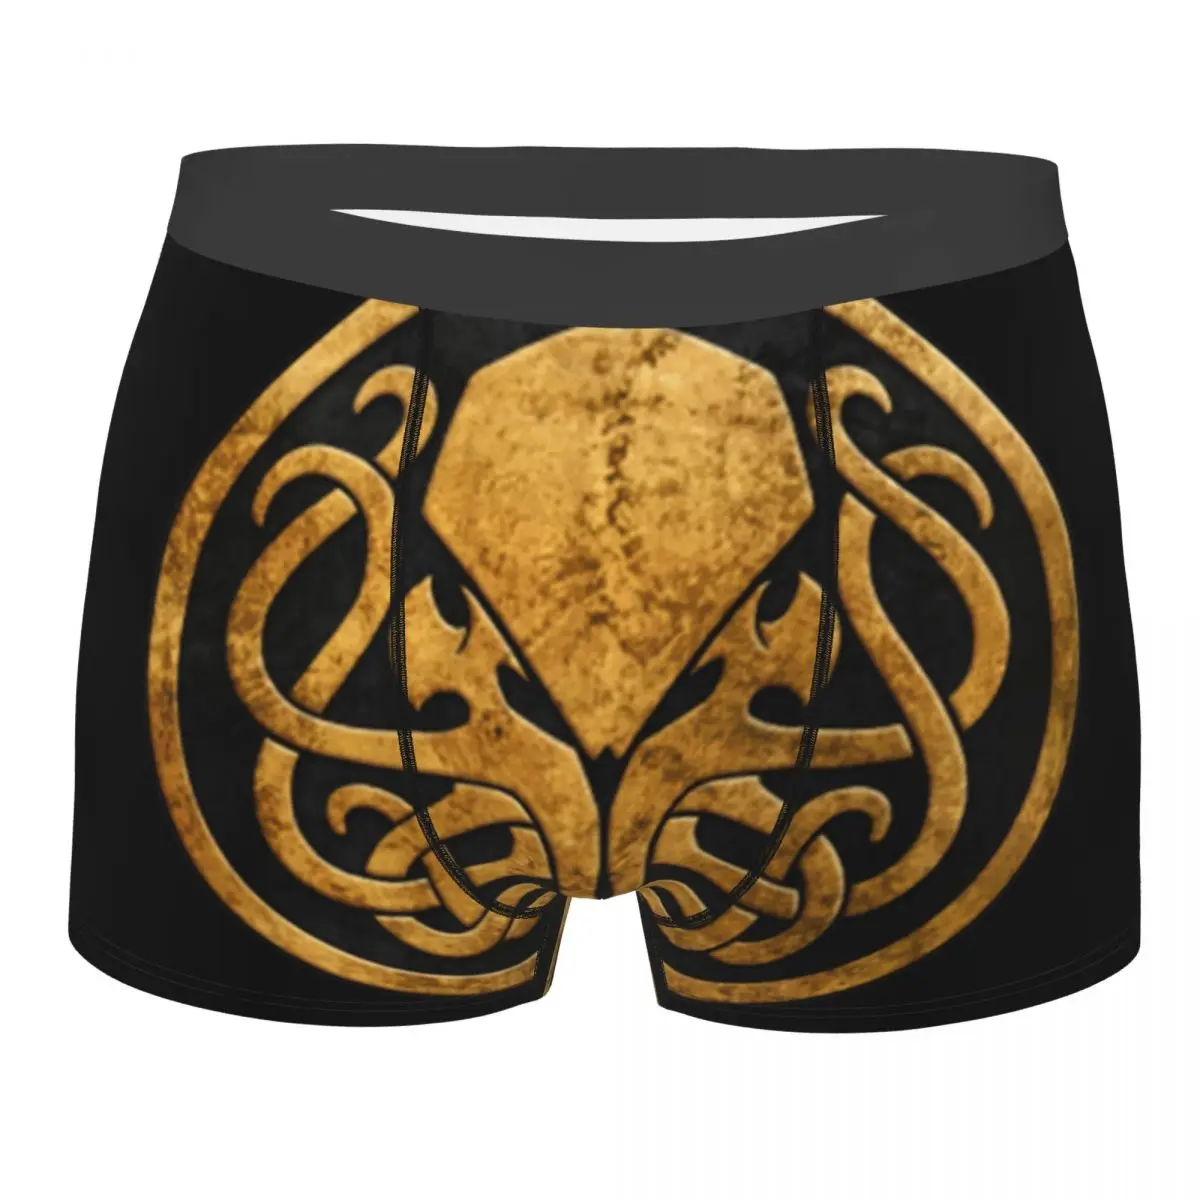 

Call Of Cthulhu Lovecraft Men Underwear Boxer Shorts Panties Novelty Mid Waist Underpants for Homme S-XXL